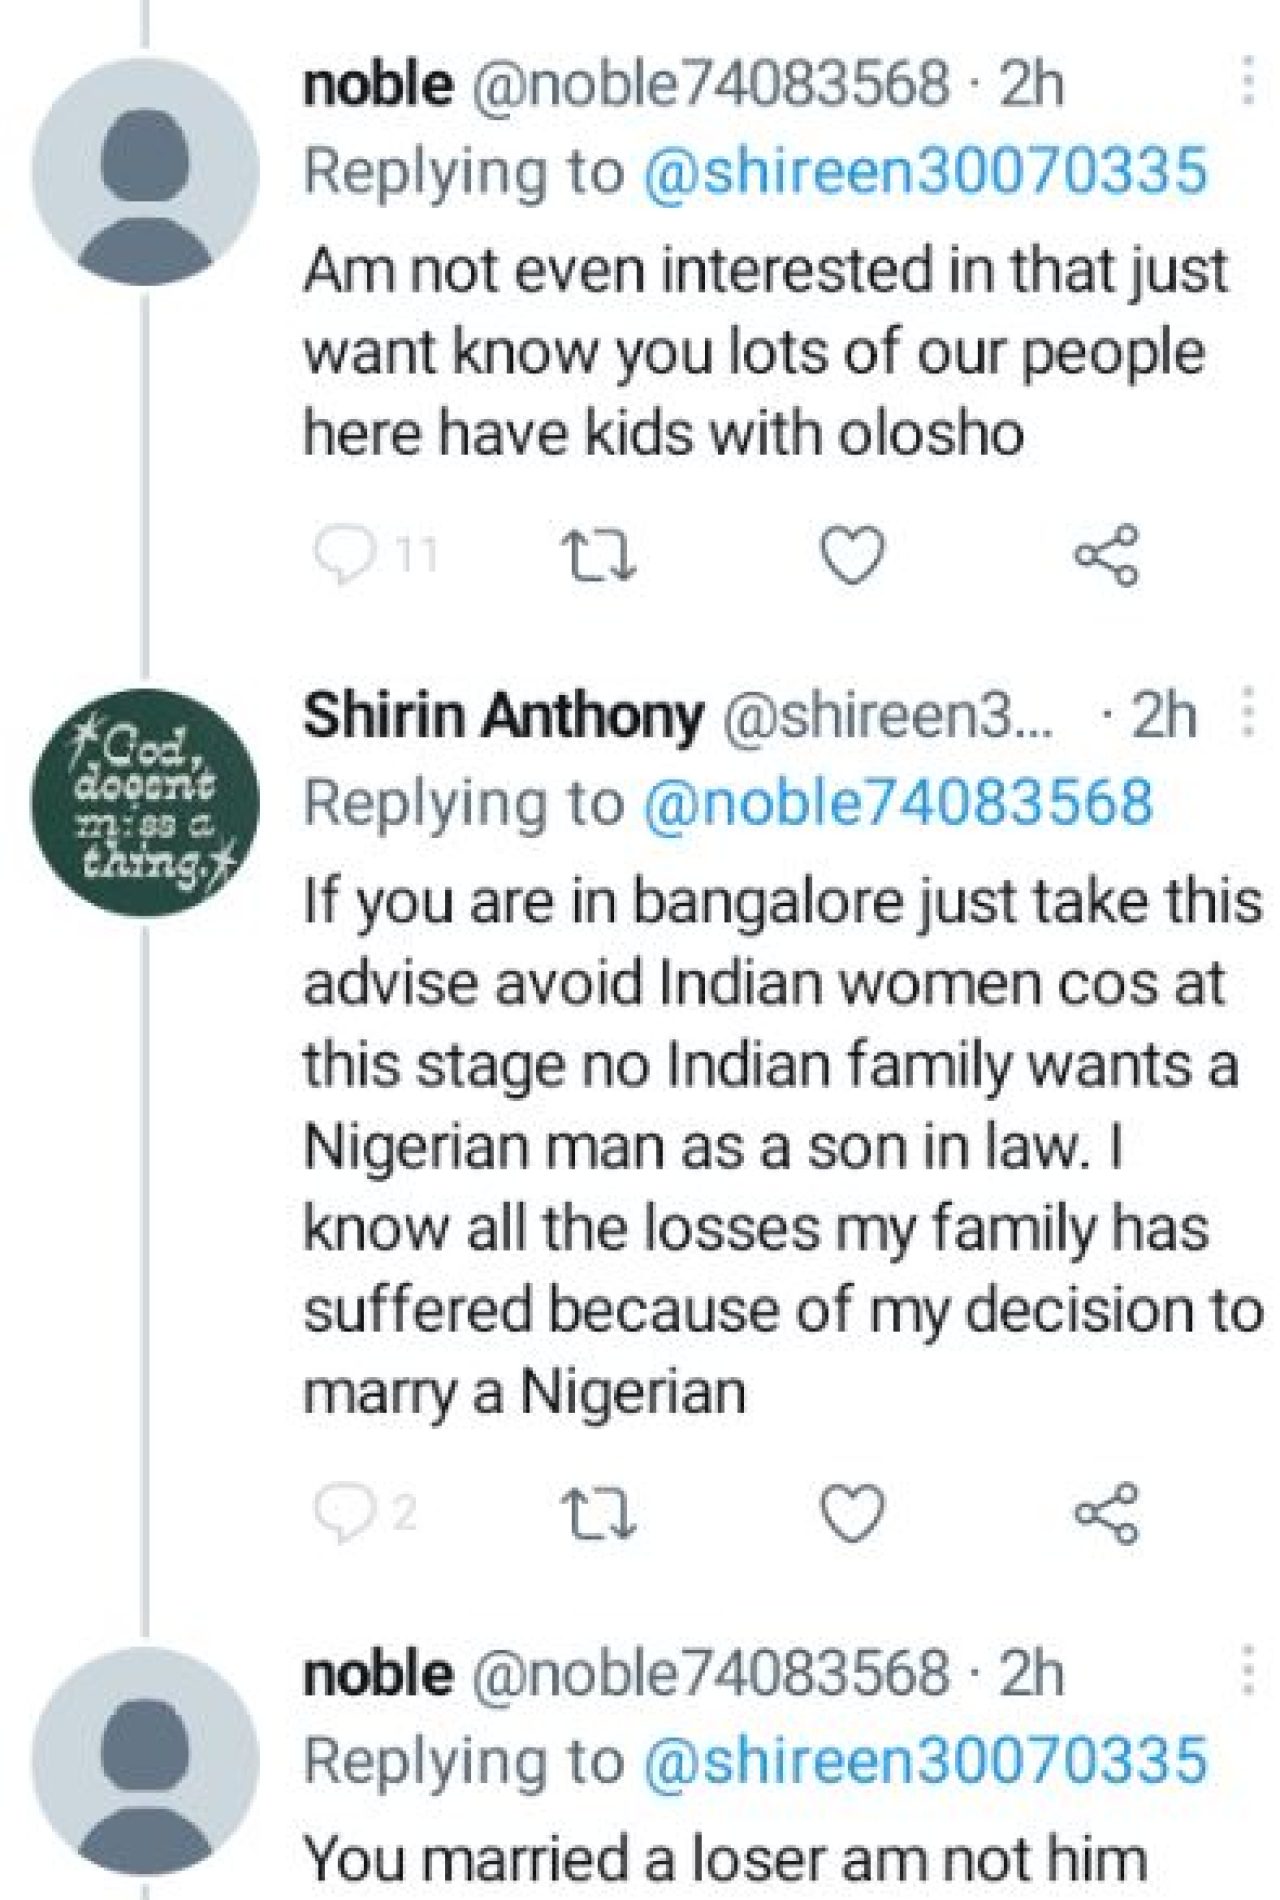 Talk to them and they will carry their ancestors debts on your head - Indian widow of Nigerian man drags Naija women on SM. AdvertAfrica News on afronewswire.com: Amplifying Africa's Voice | afronewswire.com | Breaking News & Stories